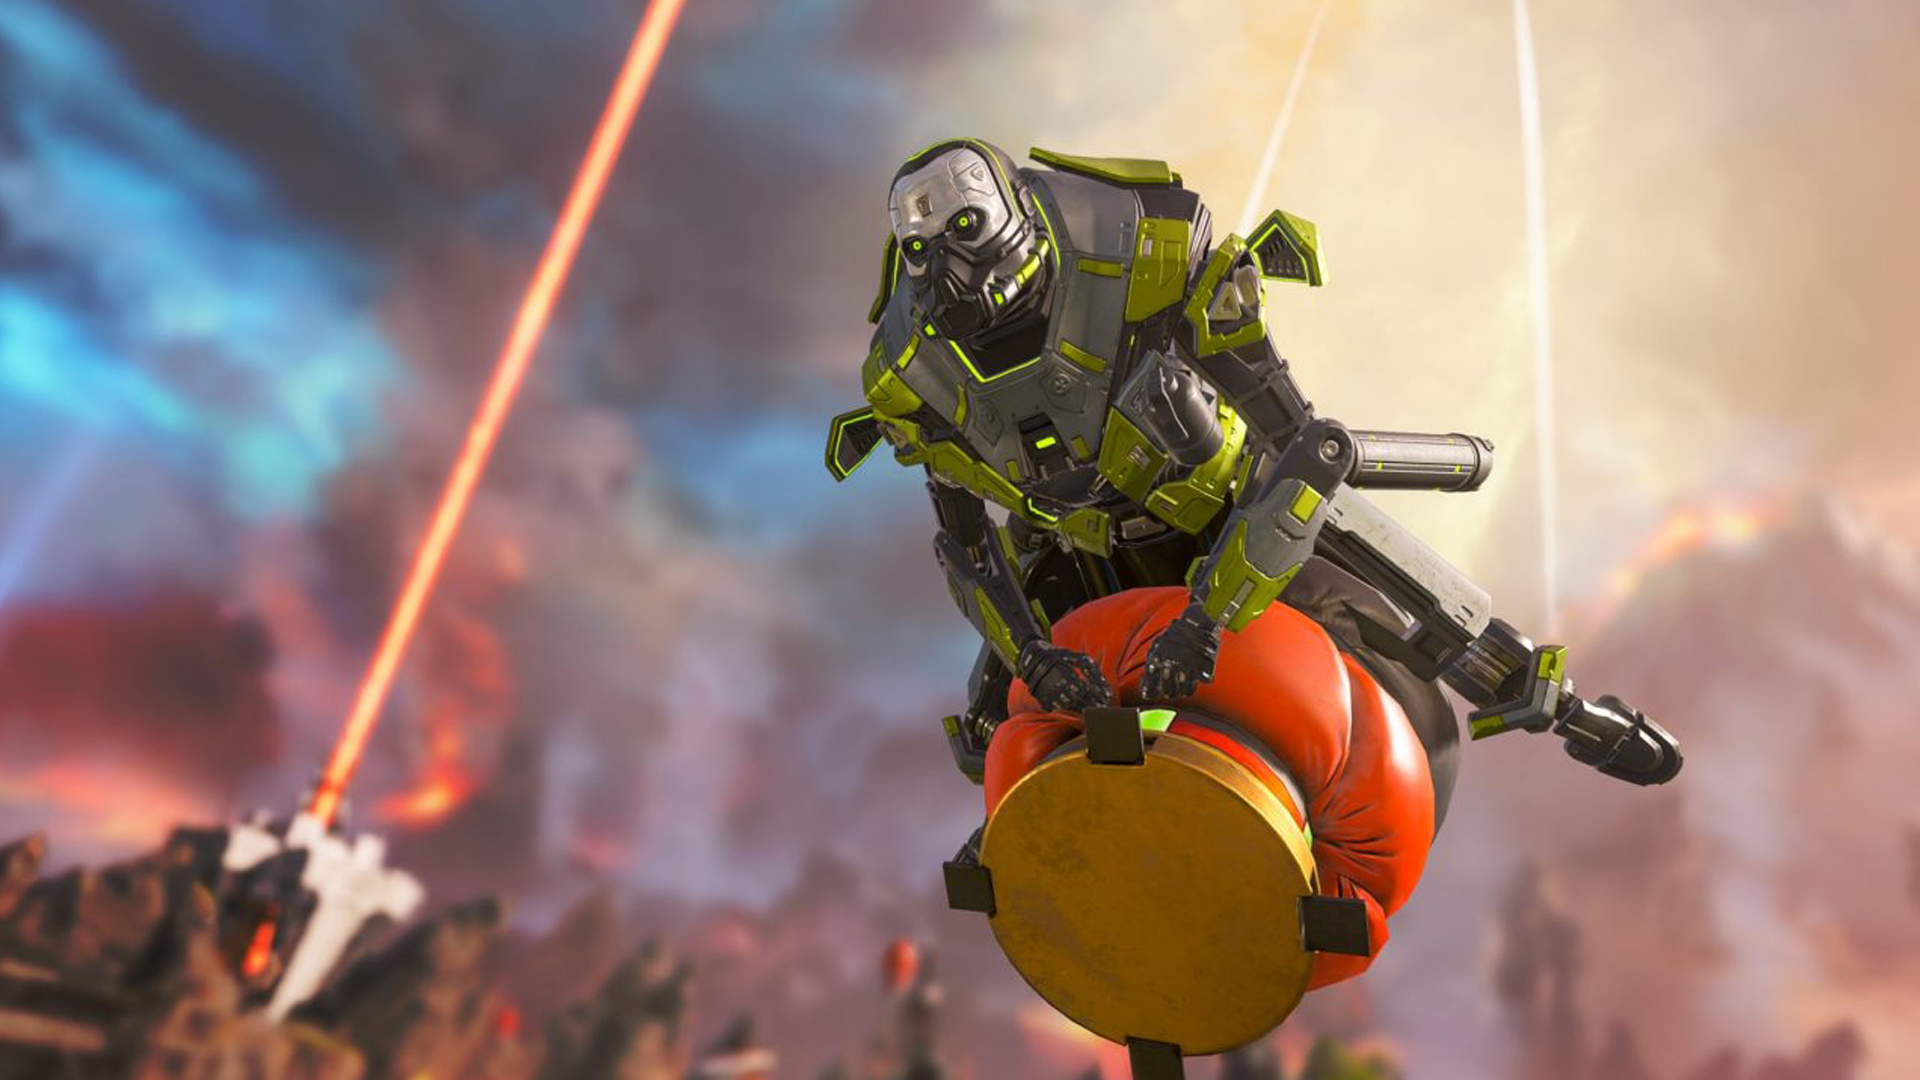 Don't worry about PC crossplay, says Apex Legends dev - console players  won't get matched with PC lobbies